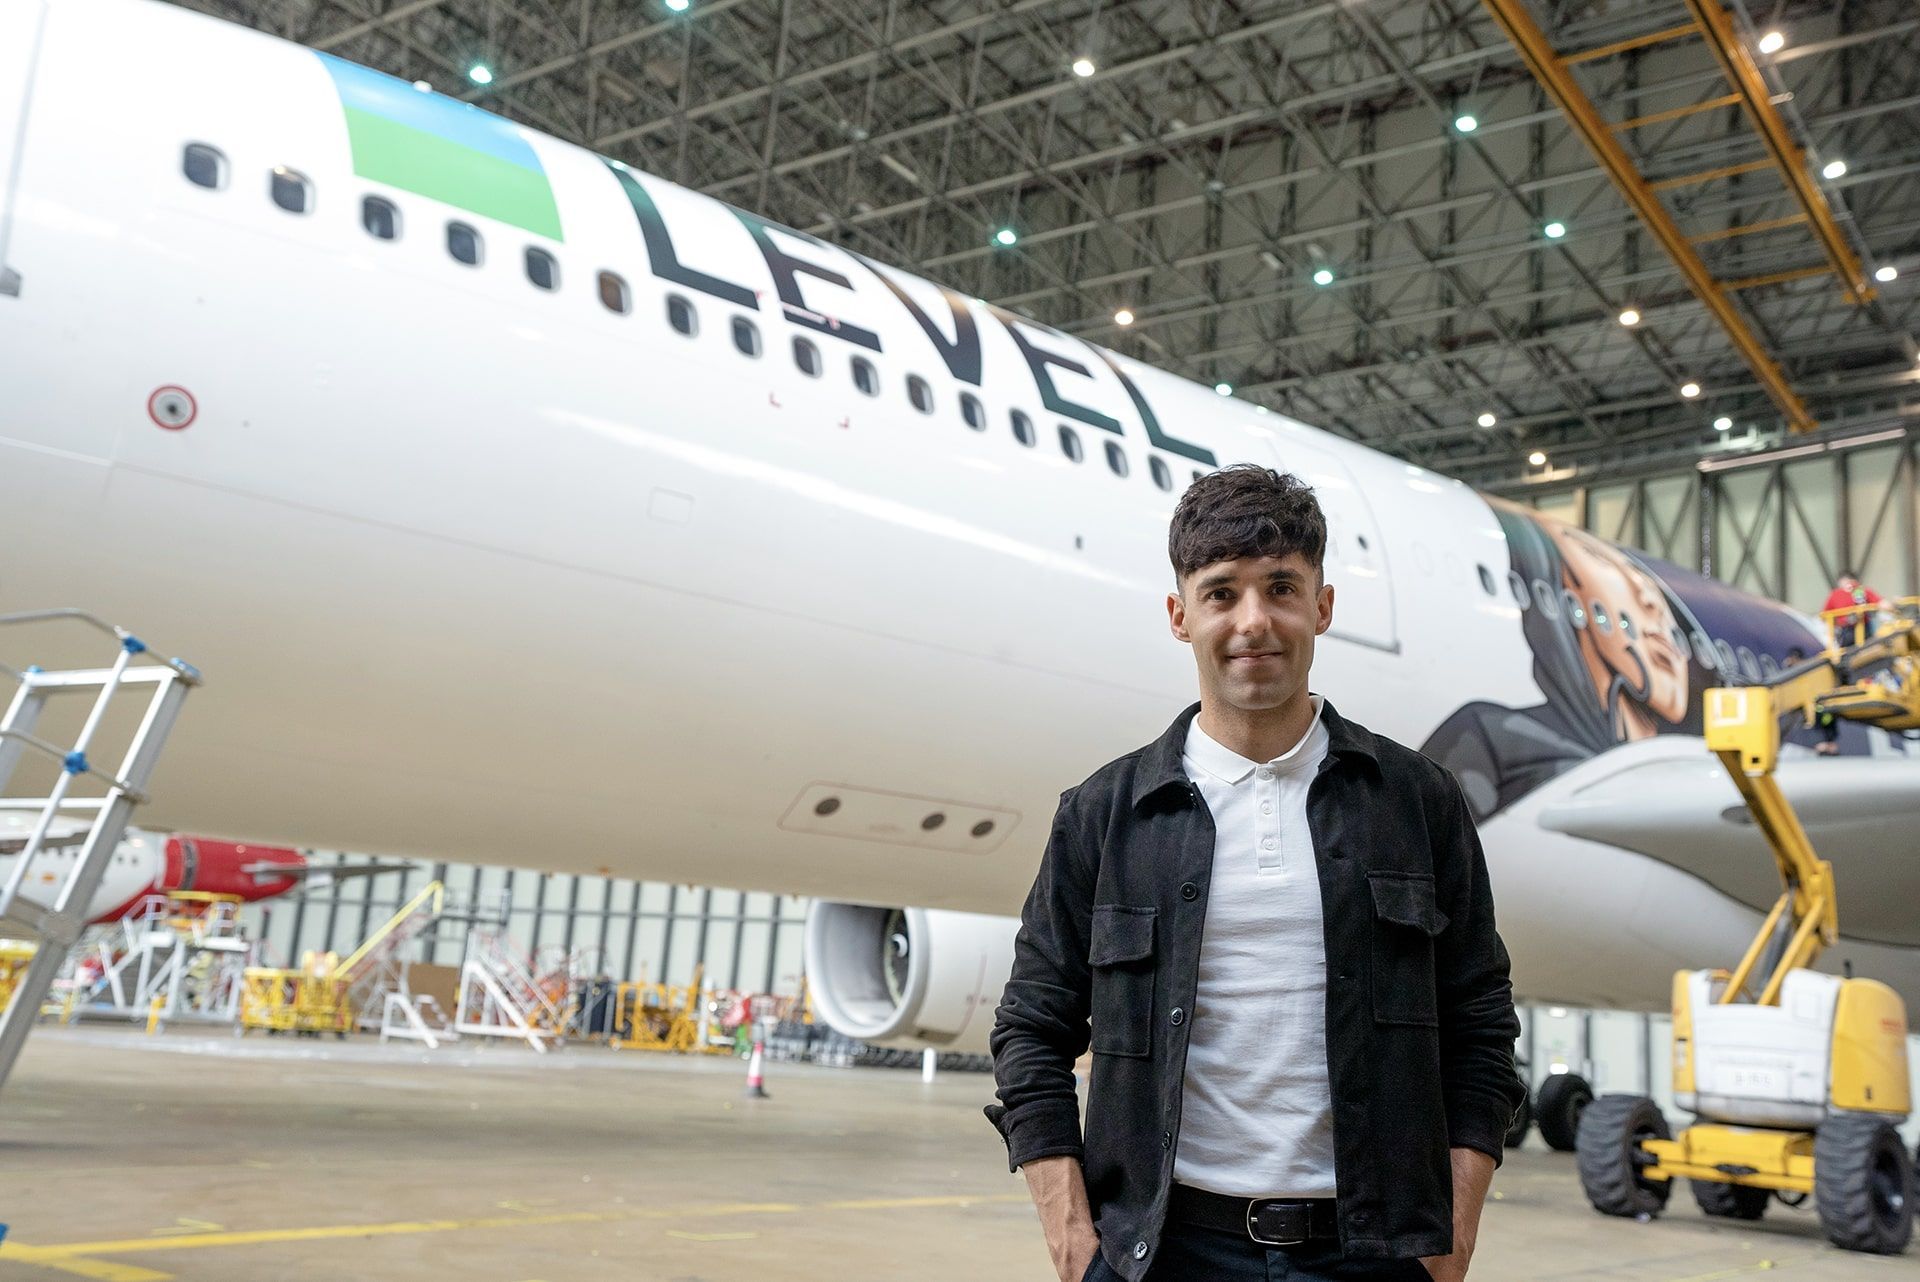 LEVEL Decorates Airbus A330 With Magician's Face To Fly To New York